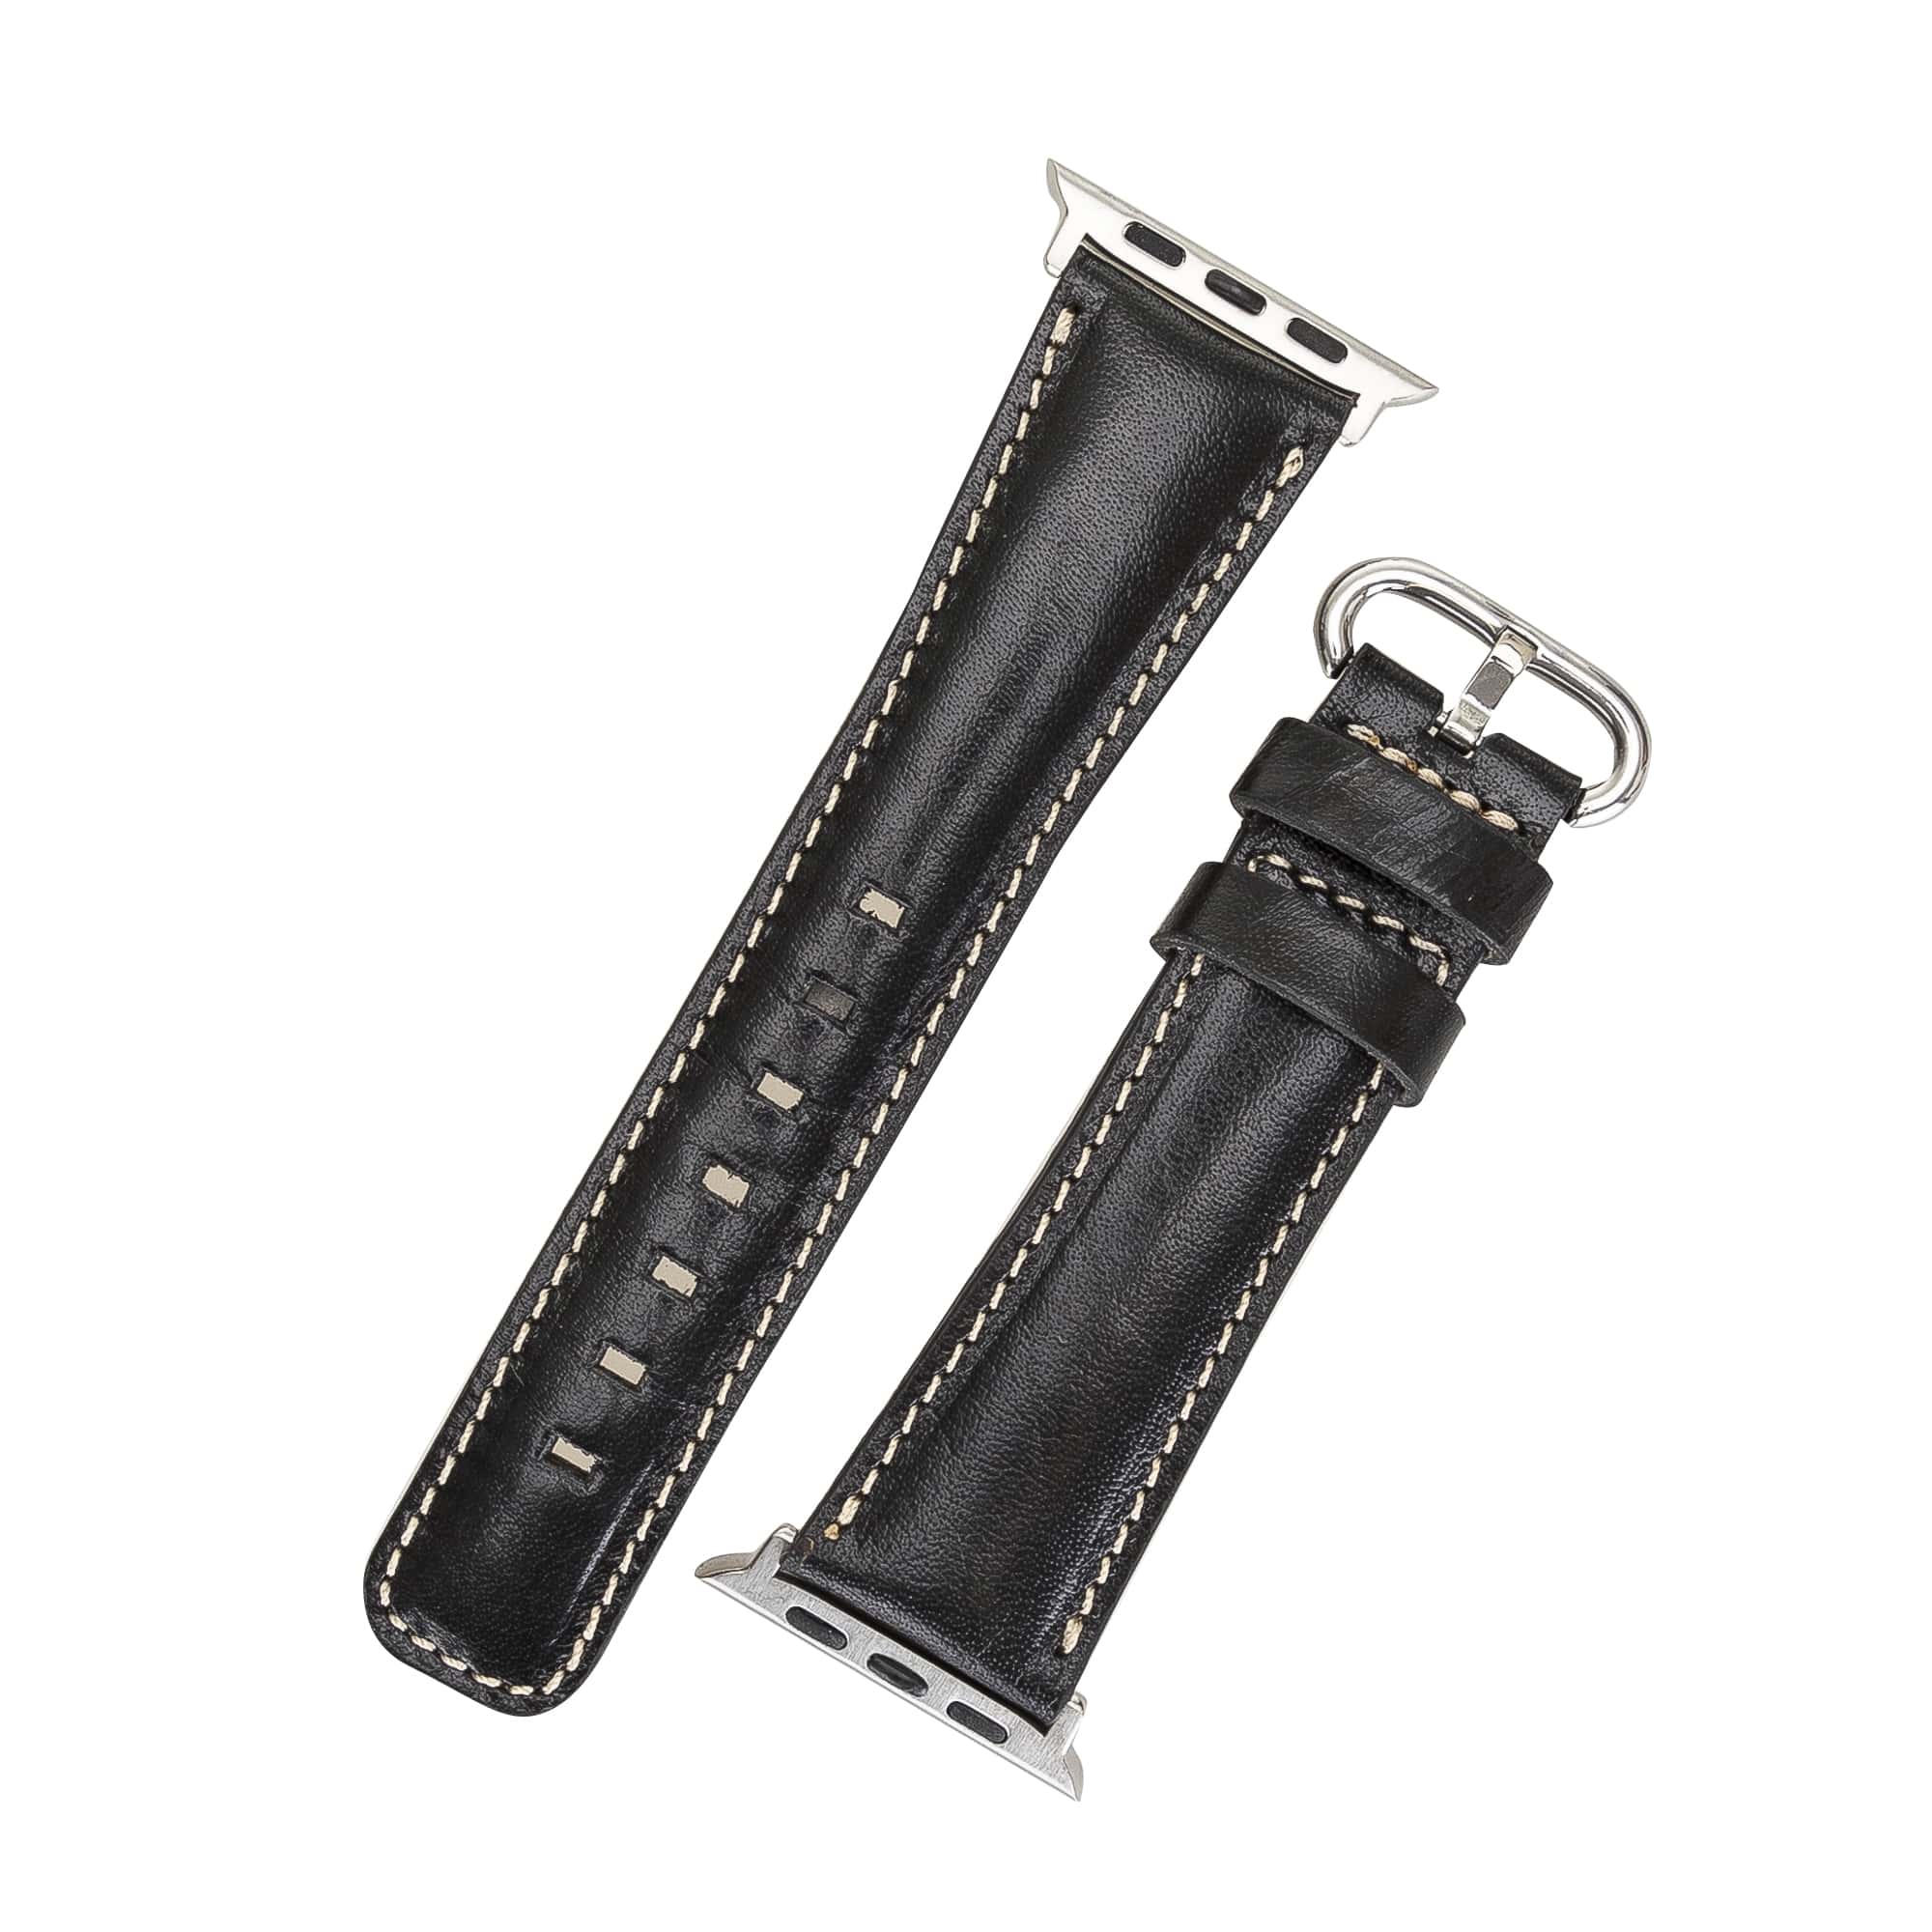 Oxford Black Genuine Leather Apple Watch Band Strap 38mm 40mm 42mm 44mm 45mm for All Series - Bomonti - 3